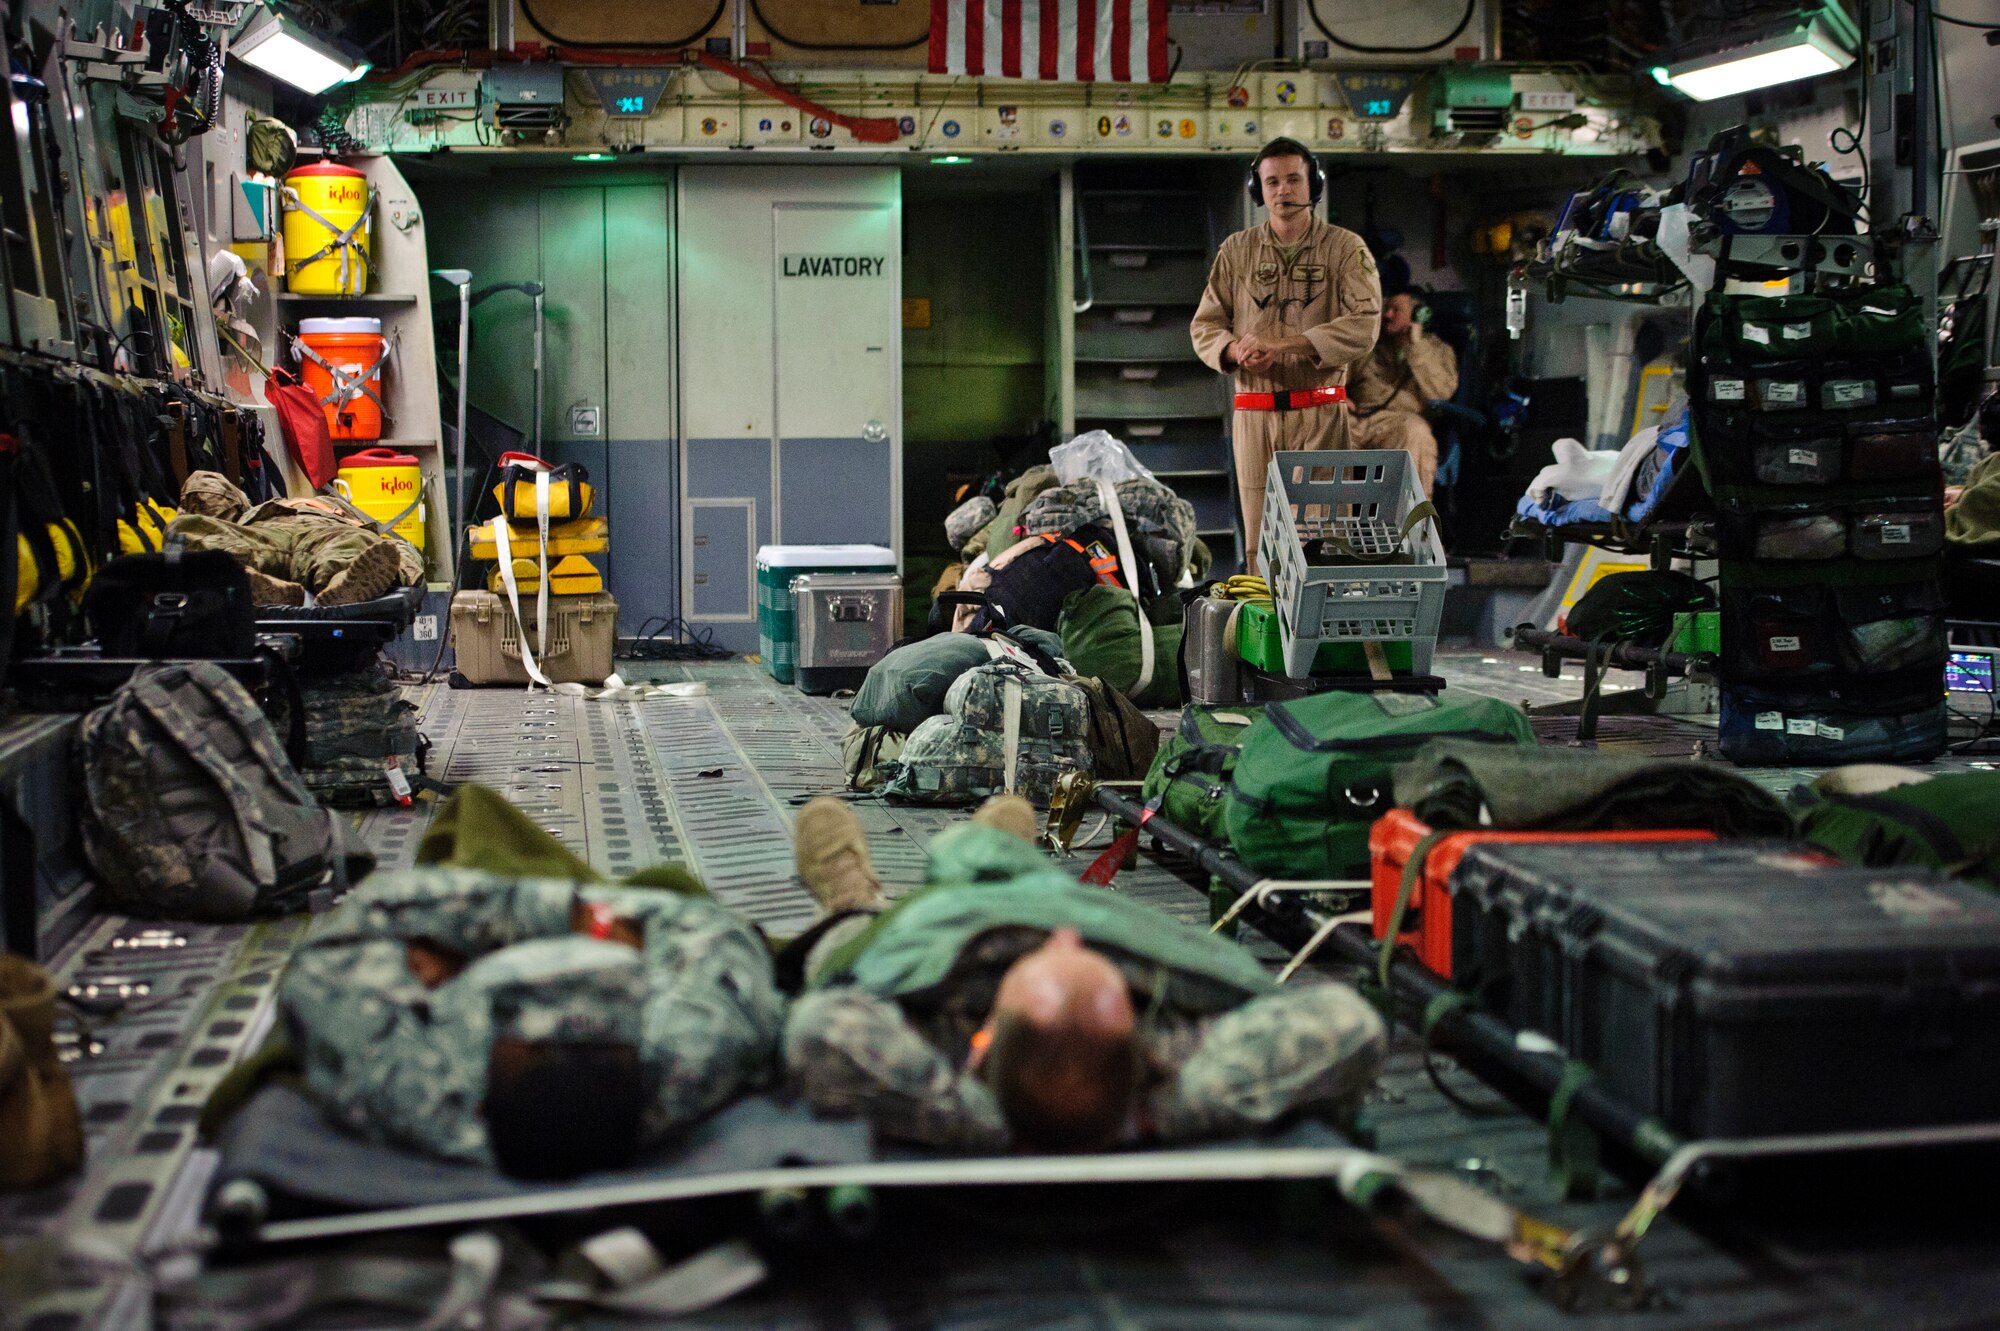 SOUTHWEST ASIA – Patients rest as Tech. Sgt. Travis Shore, 379th Expeditionary Aeromedical Evacuation Squadron medical technician, watches over them during an evacuation flight to Landstuhl Regional Medical Center, Germany, April 25, 2012. (U.S. Air Force photo/Staff Sgt. Nathanael Callon)